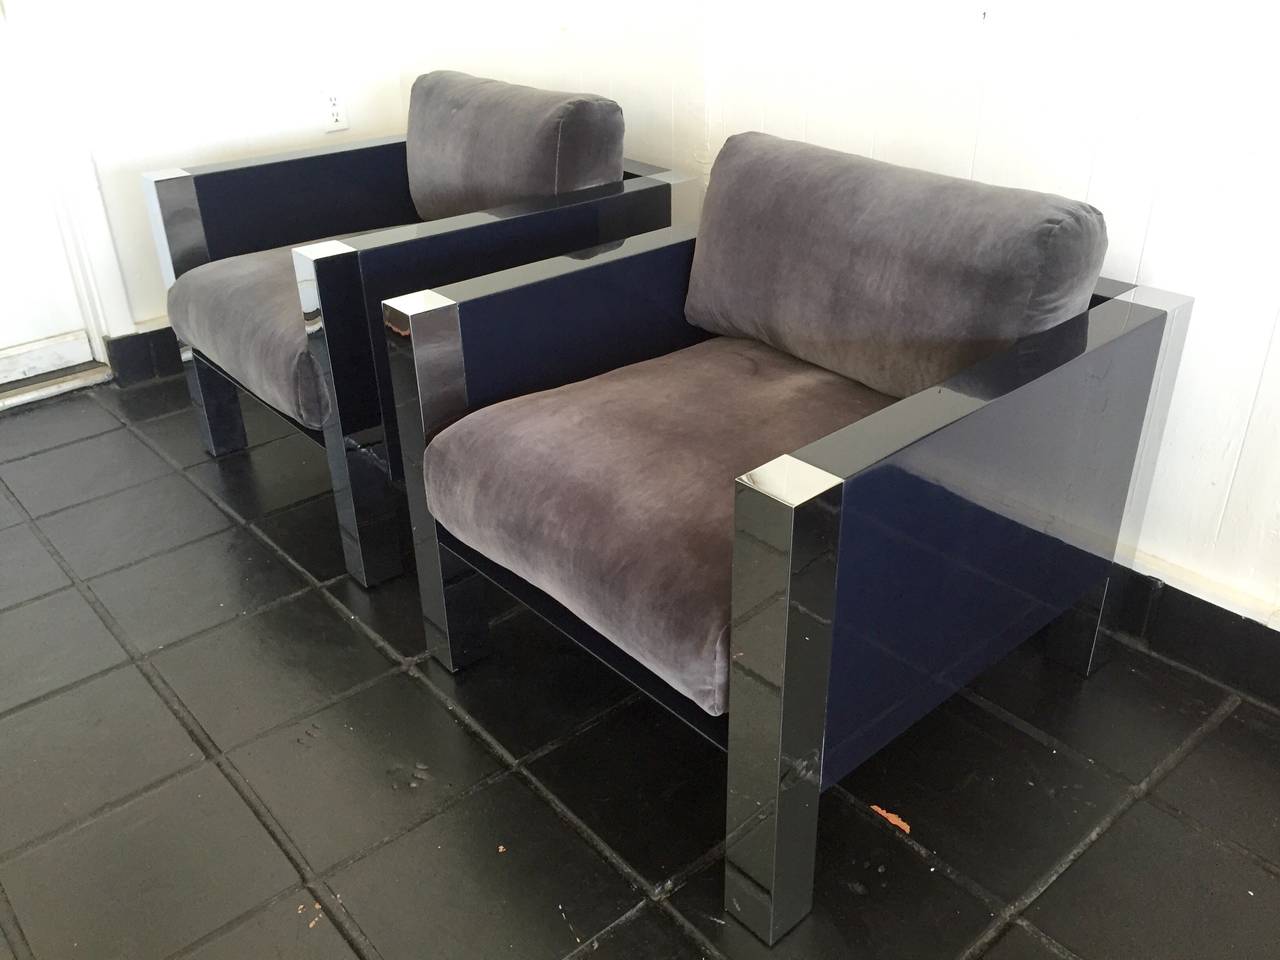 Stunning pair of club chairs with polished steel legs and a wood frame in a high gloss lacquer. Finished with a grey velour and down cushion upholstery.